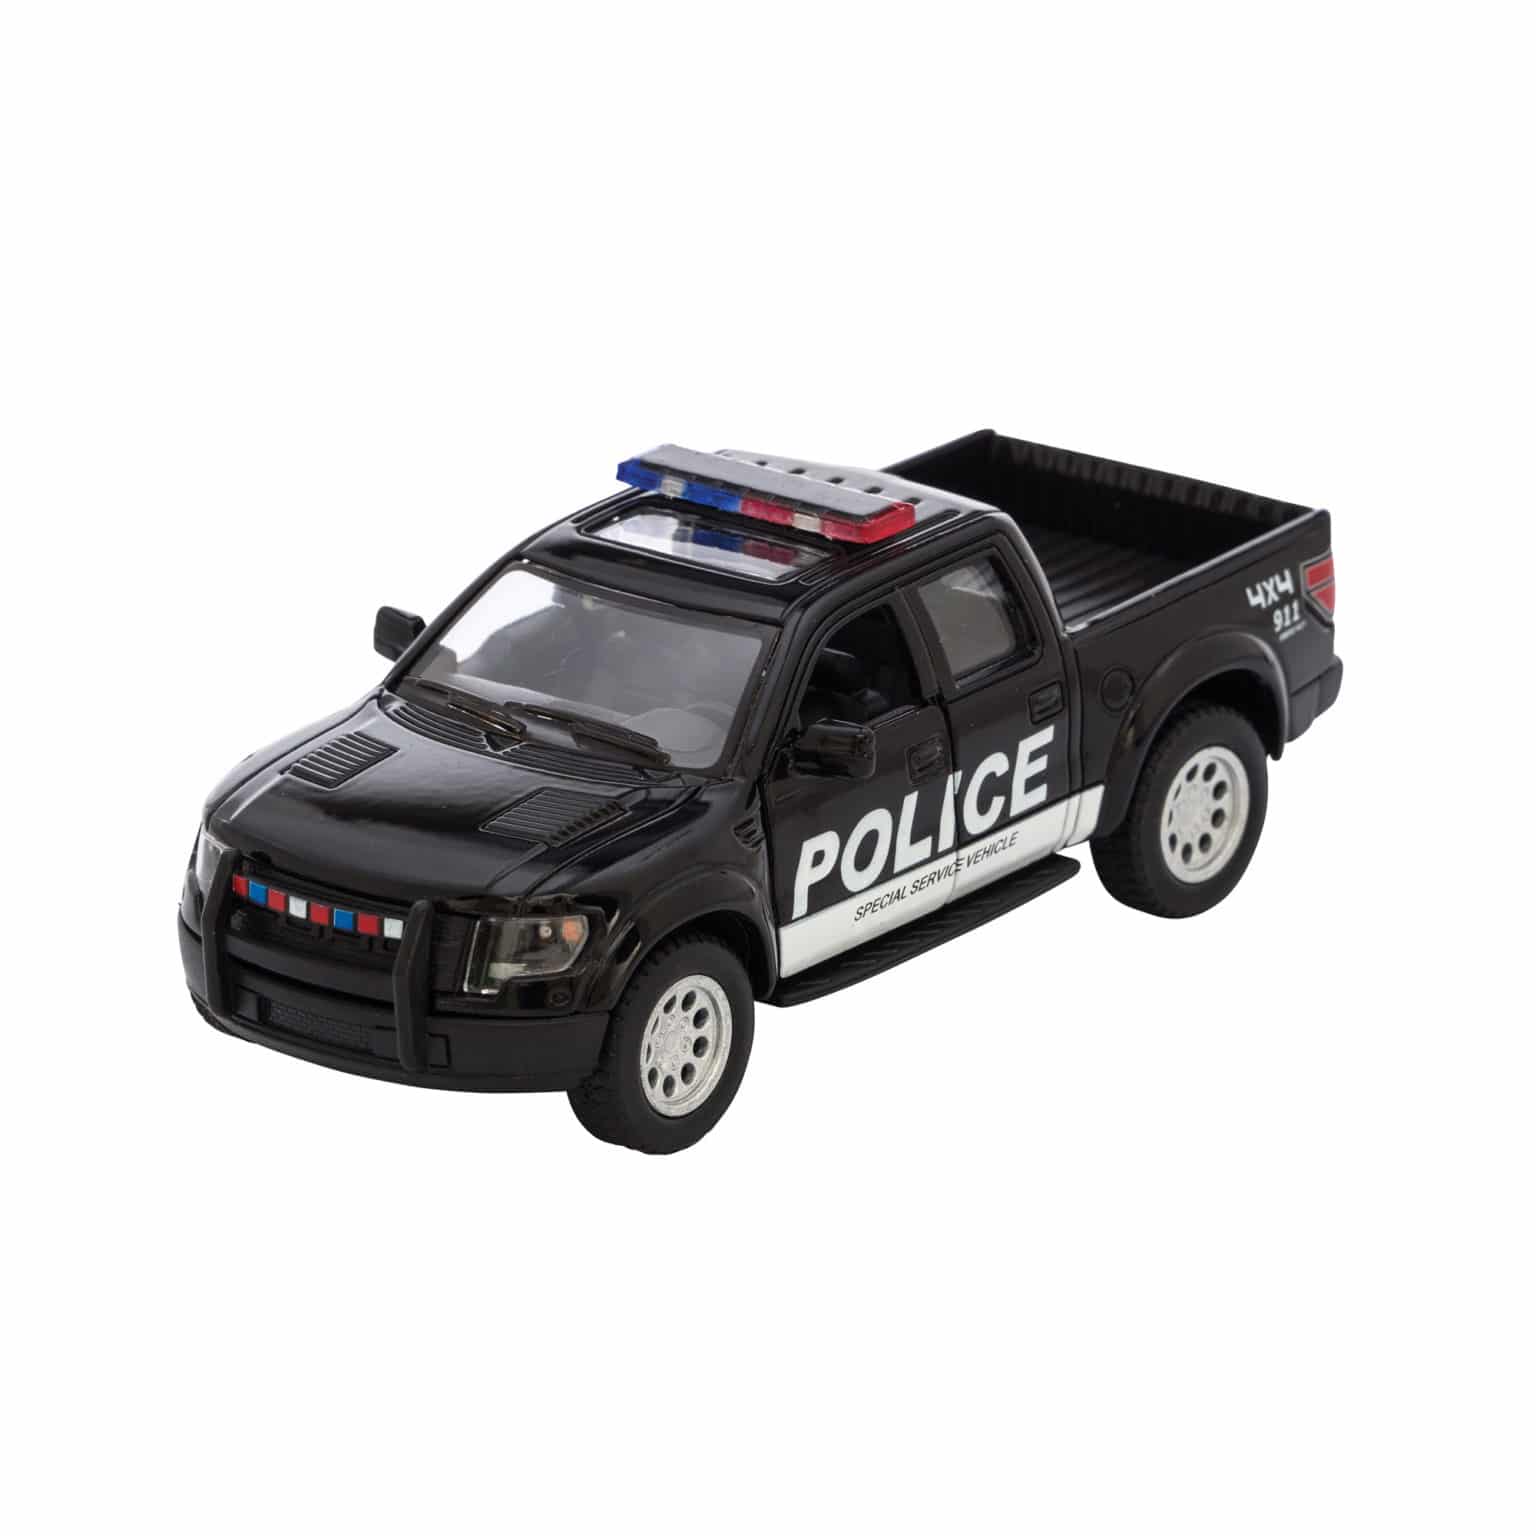 Raptor Fire - Police Rescue-Vehicles & Transportation-Schylling-Yellow Springs Toy Company